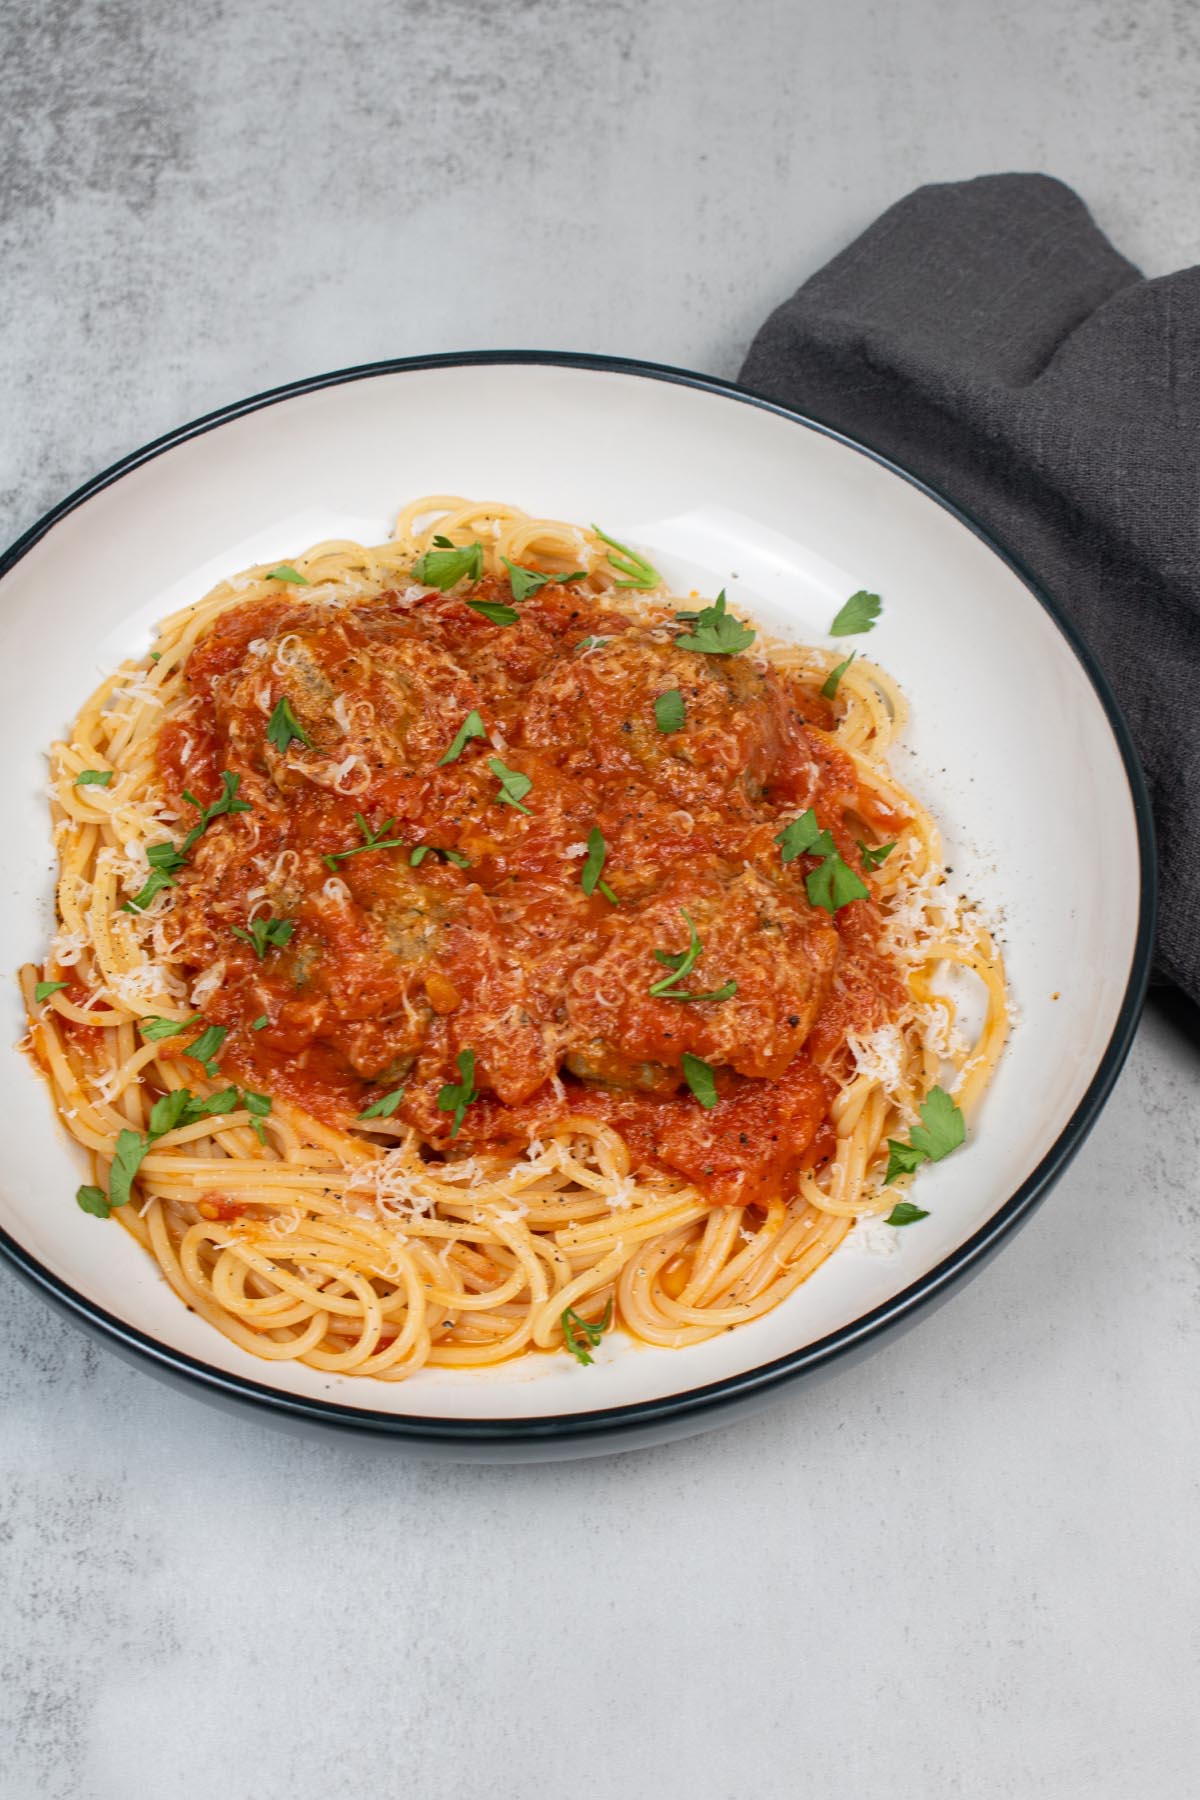 Meatballs with tomato sauce and spaghetti in a pasta bowl, garnished with parmesan and parsley